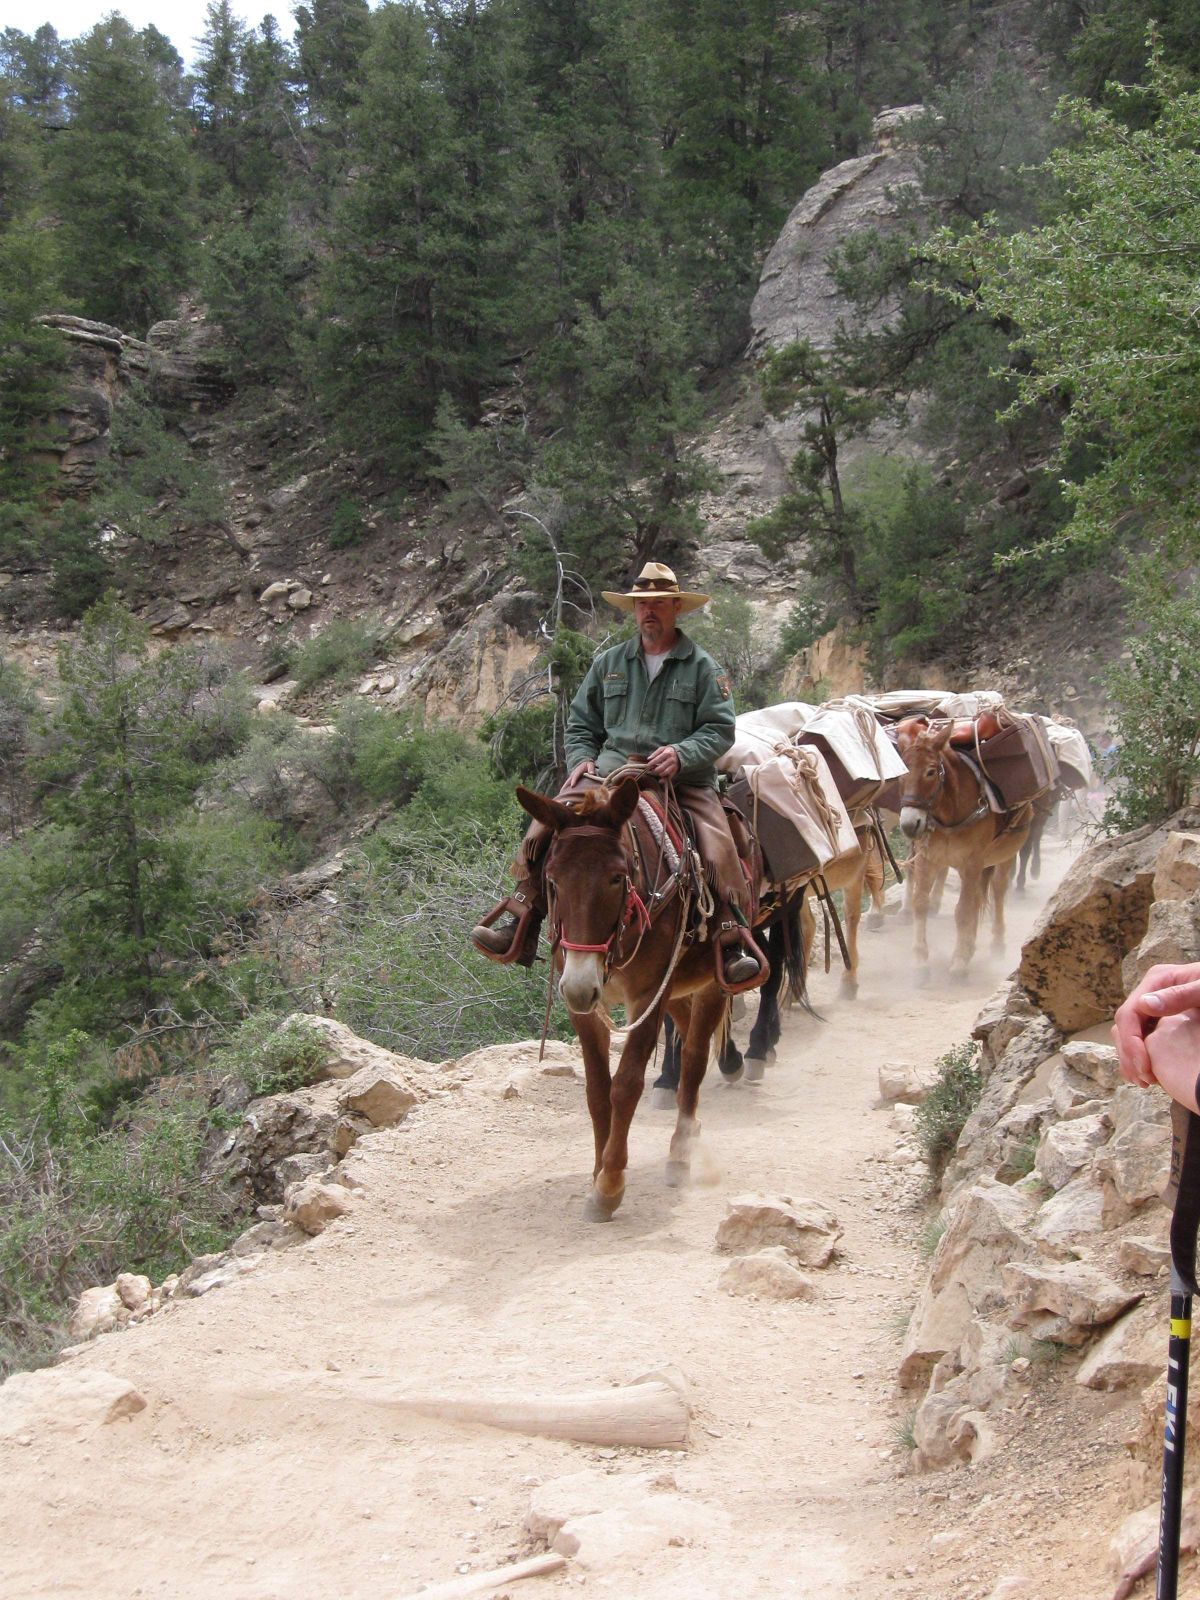 Eric Gray, a trails maintenance worker at the Grand Canyon, leads a group of mules carrying supplies down a popular park trail in Grand Canyon National Park.  (Associated Press / The Spokesman-Review)